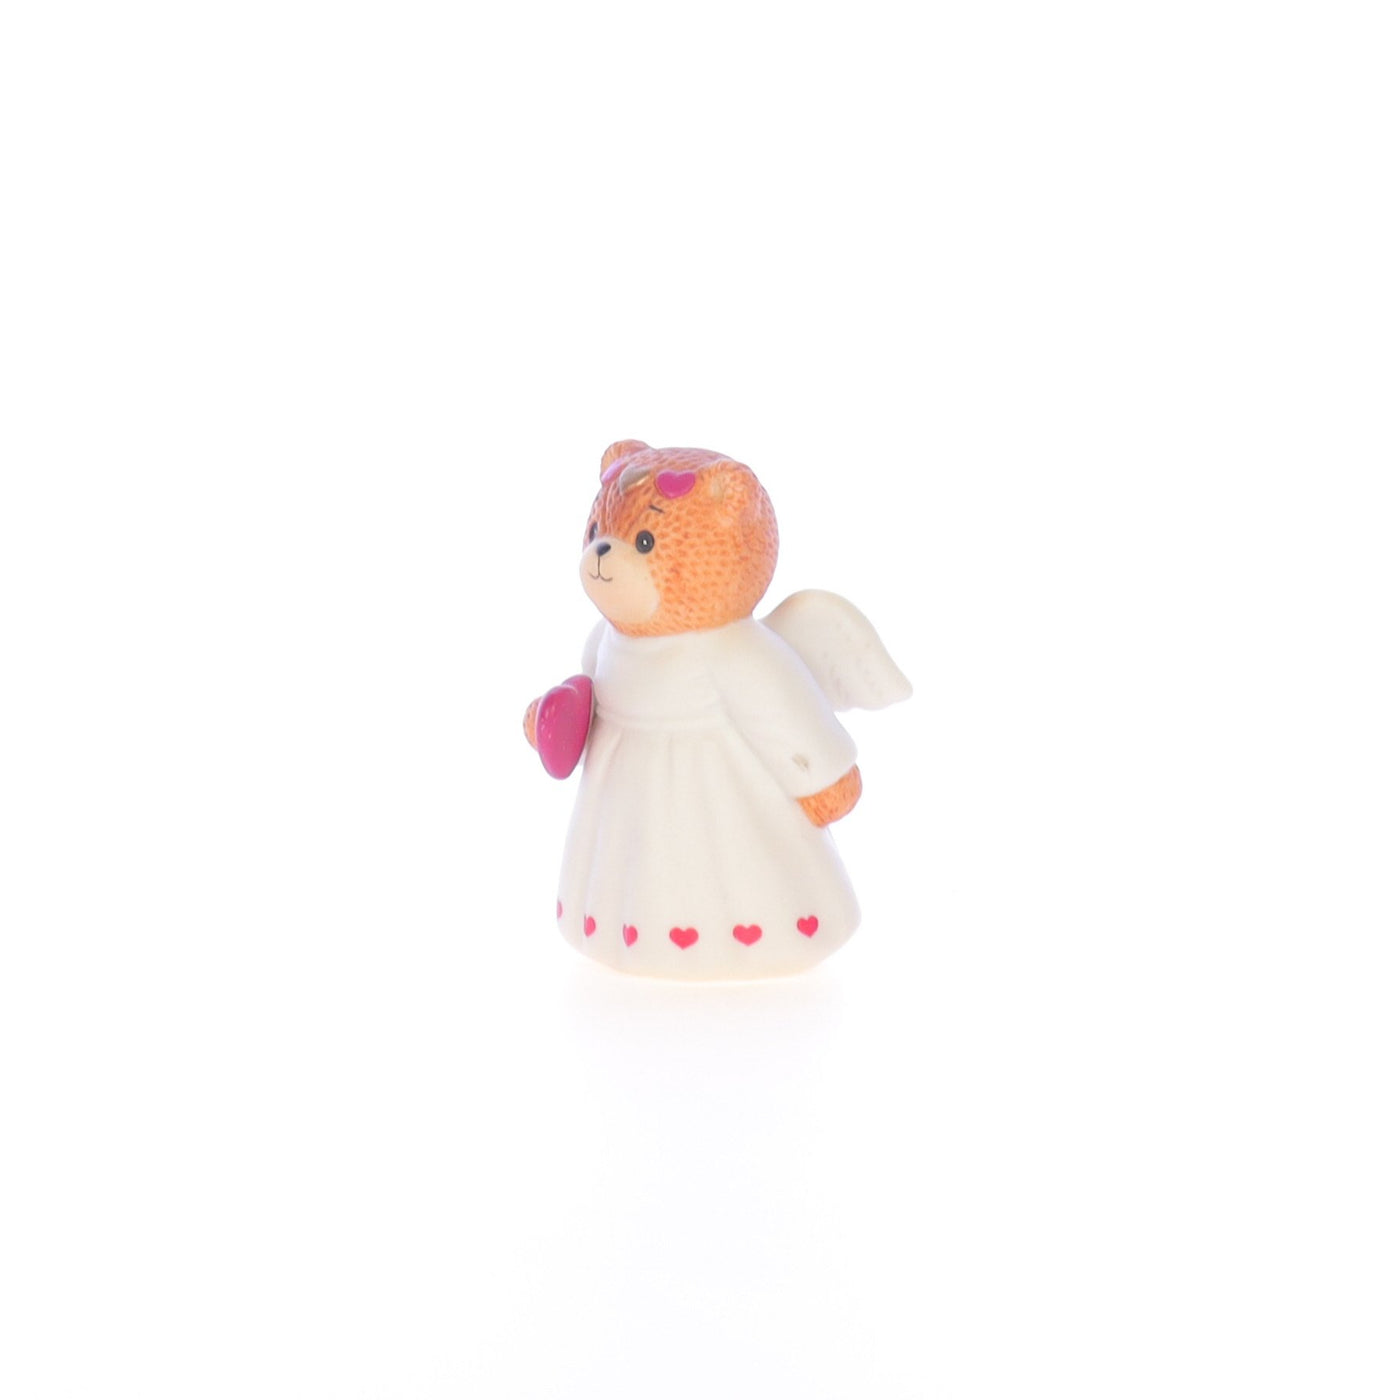 Lucy_And_Me_by_Lucy_Atwell_Porcelain_Figurine_Angel_of_Love_Bear_Lucy_Unknown_049_02